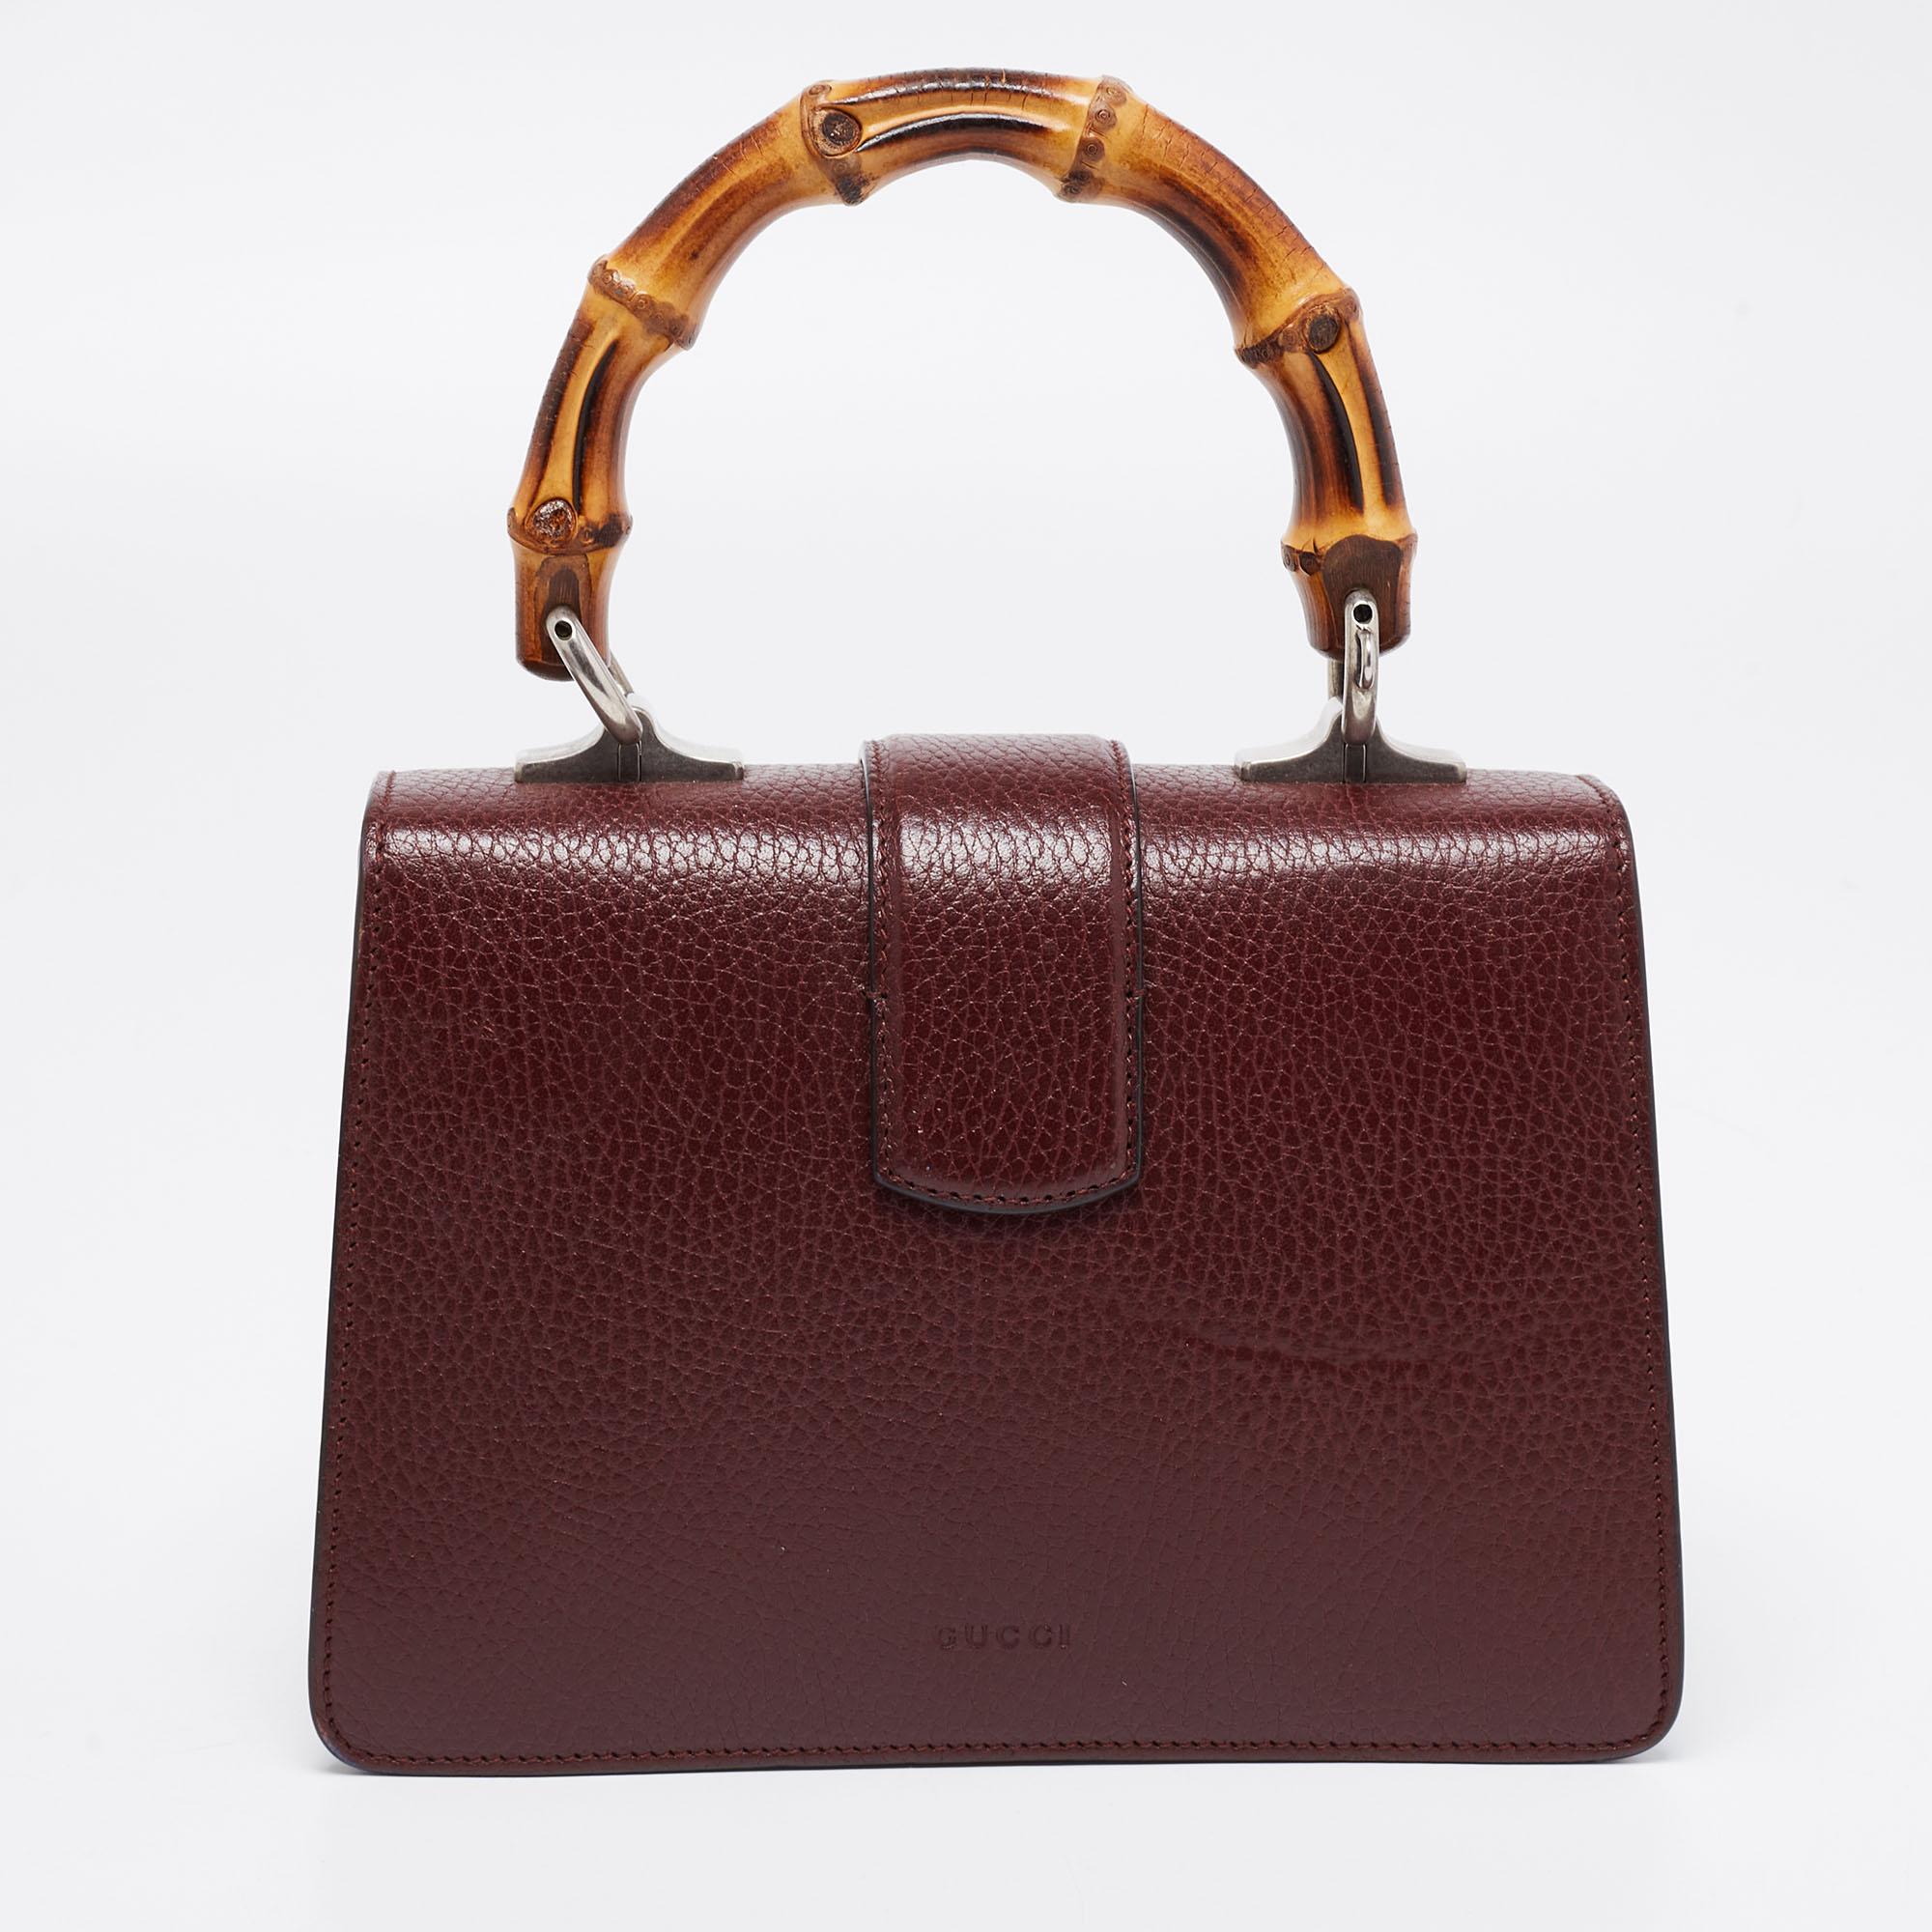 Gucci's Dionysus collection is inspired by the Greek God who is believed to have crossed the Tigris river on a tiger given to him by his father, Zeus. This creation has been beautifully made from leather in a dark red hue. The flap secures the